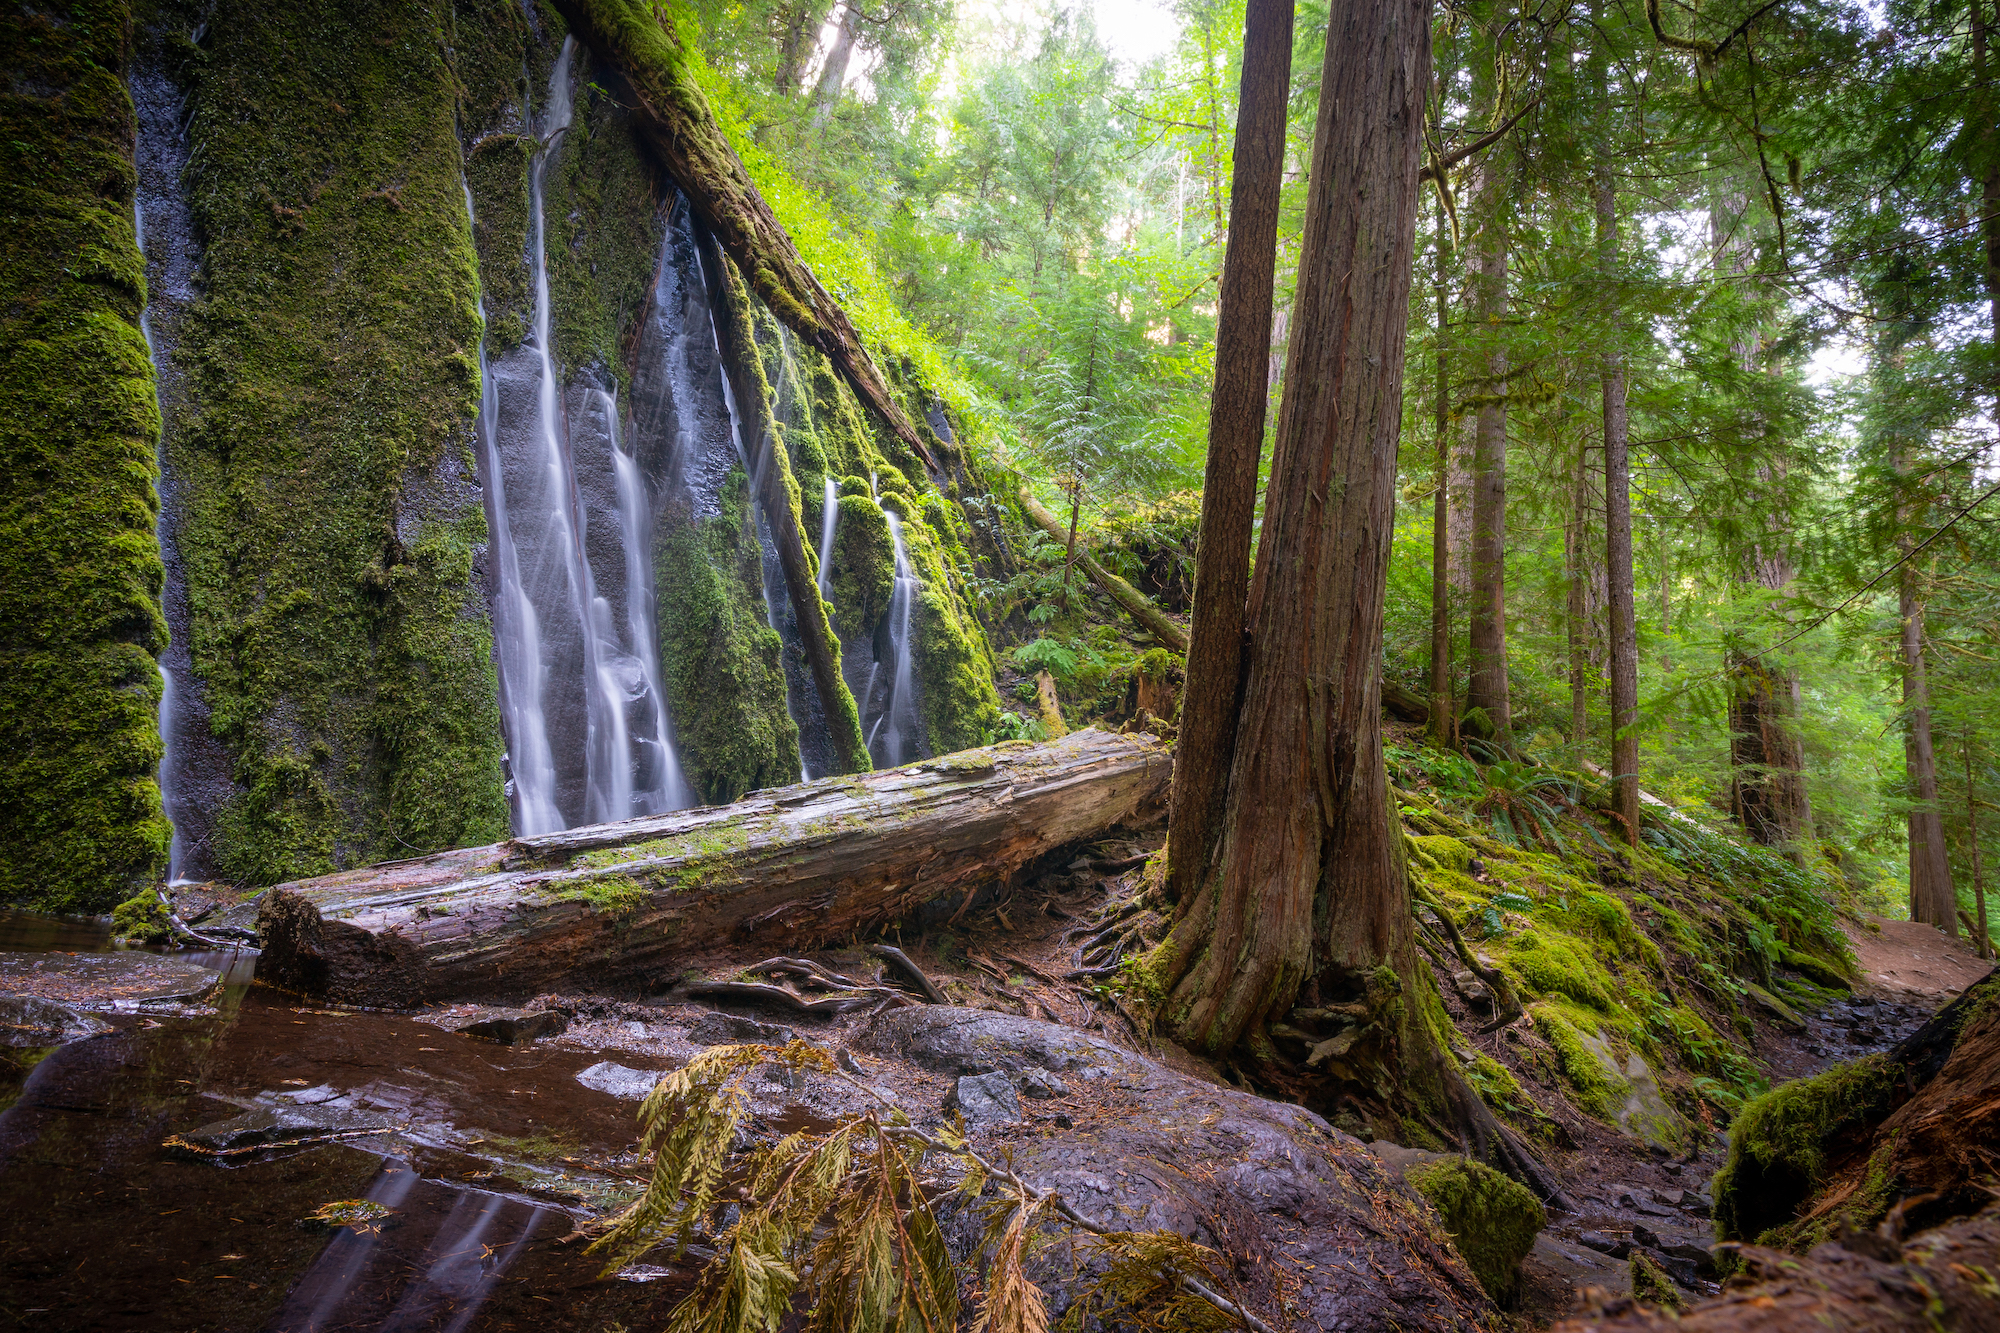 The Oregon 200 mile race travels along the North Umpqua River trail, with several waterfalls.